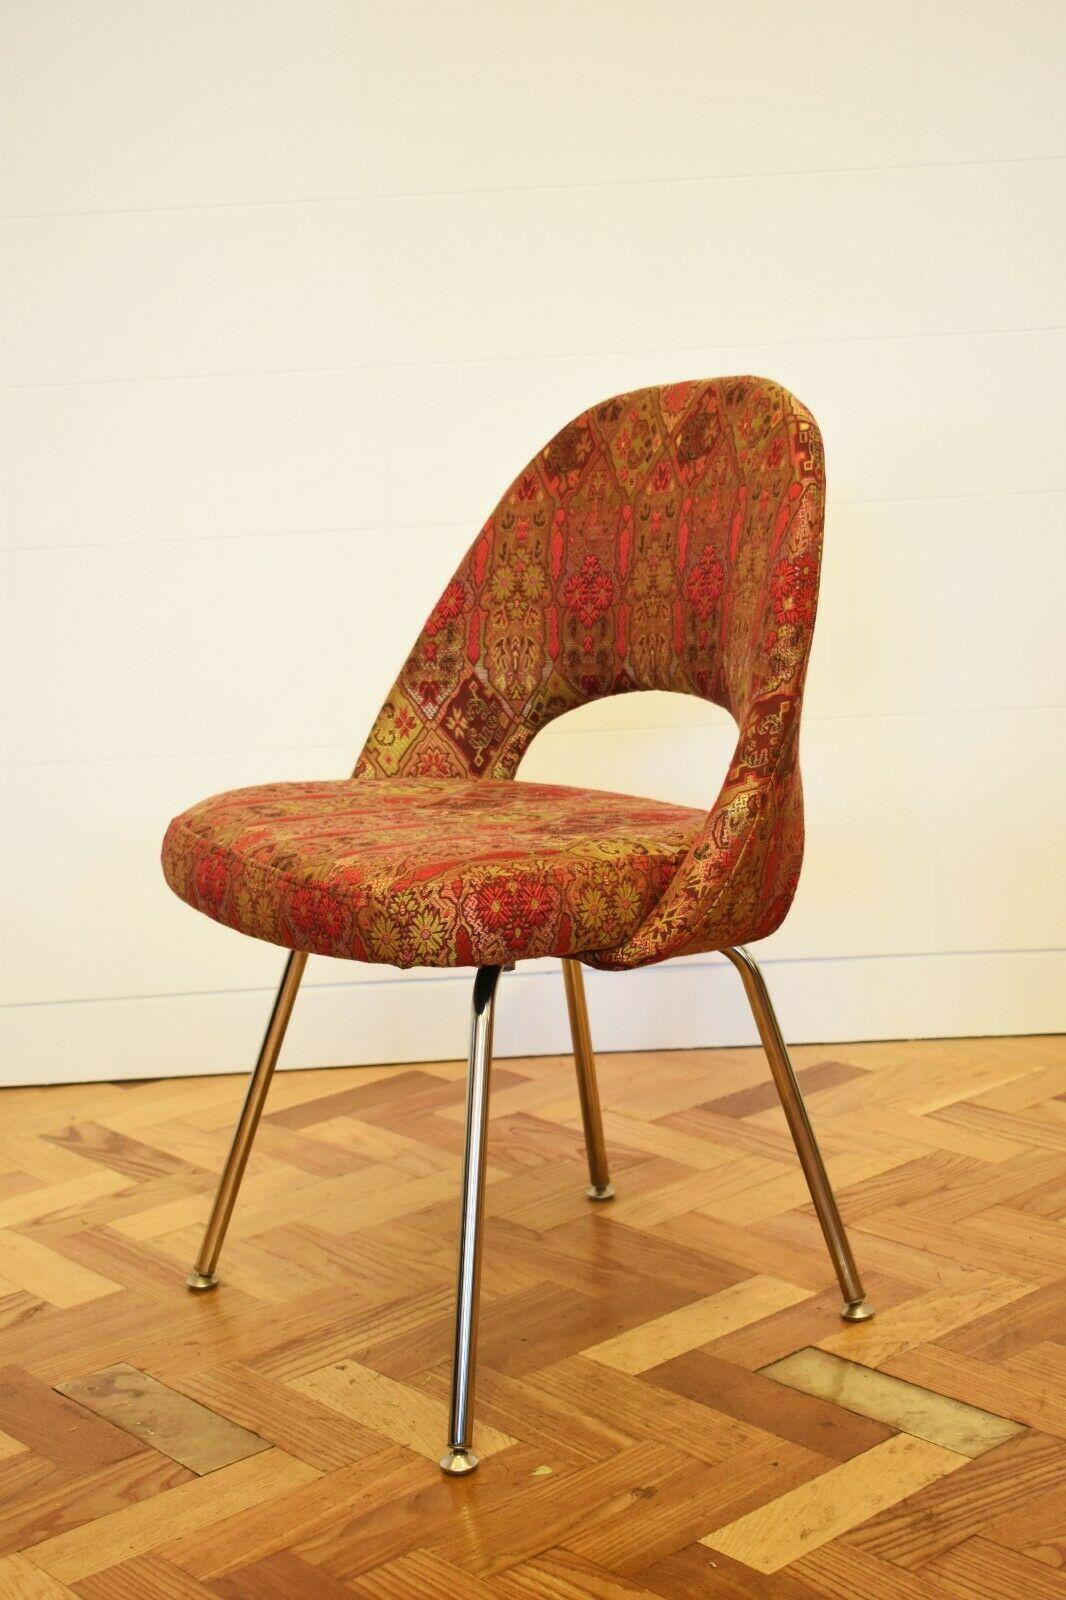 Vintage Eero Saarinen Conference chair for Knoll International

Set upon metal legs, this chair has been upholstered in a beautiful custom brocade fabric. 

An iconic design by Eero Saarinen first introduced in 1957, this style of chair